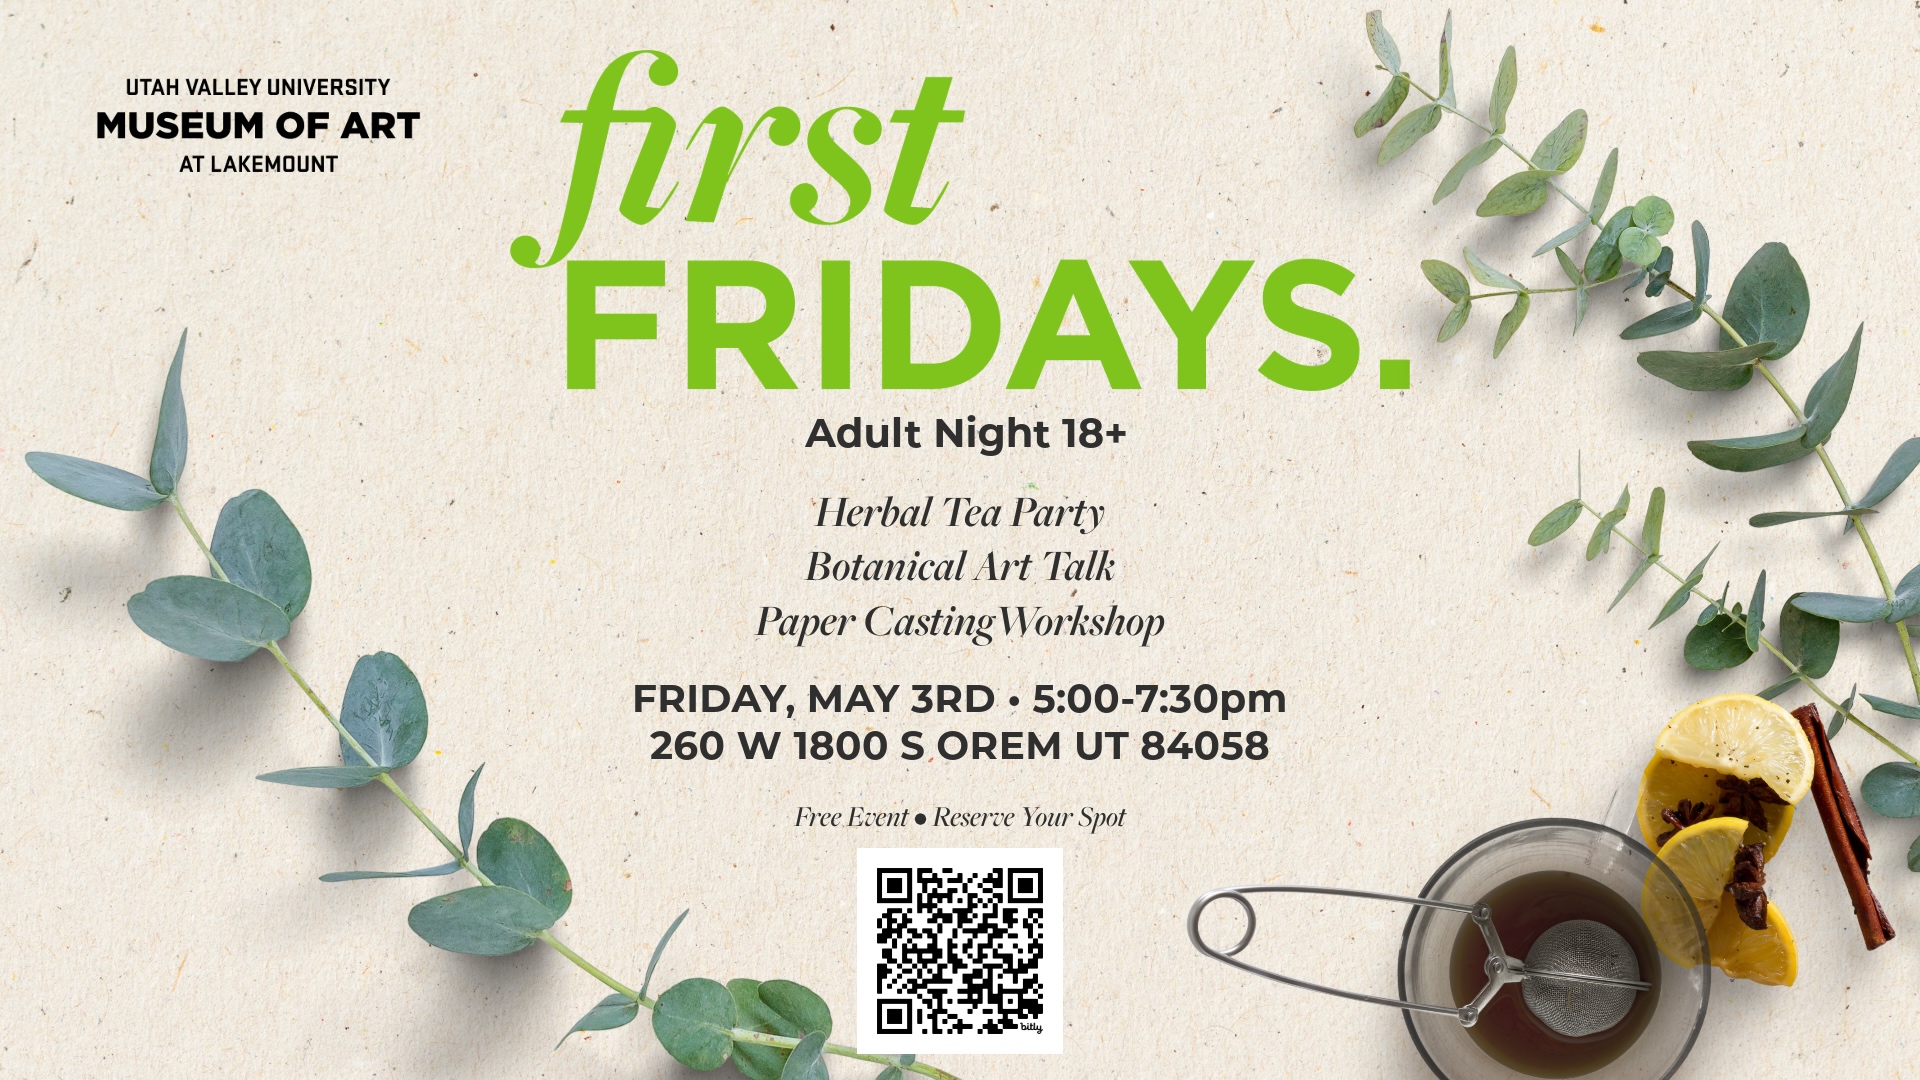 First Fridays. | May 3rd, 5:00pm - 7:30pm | Free Event, Reserve Your Spot! 